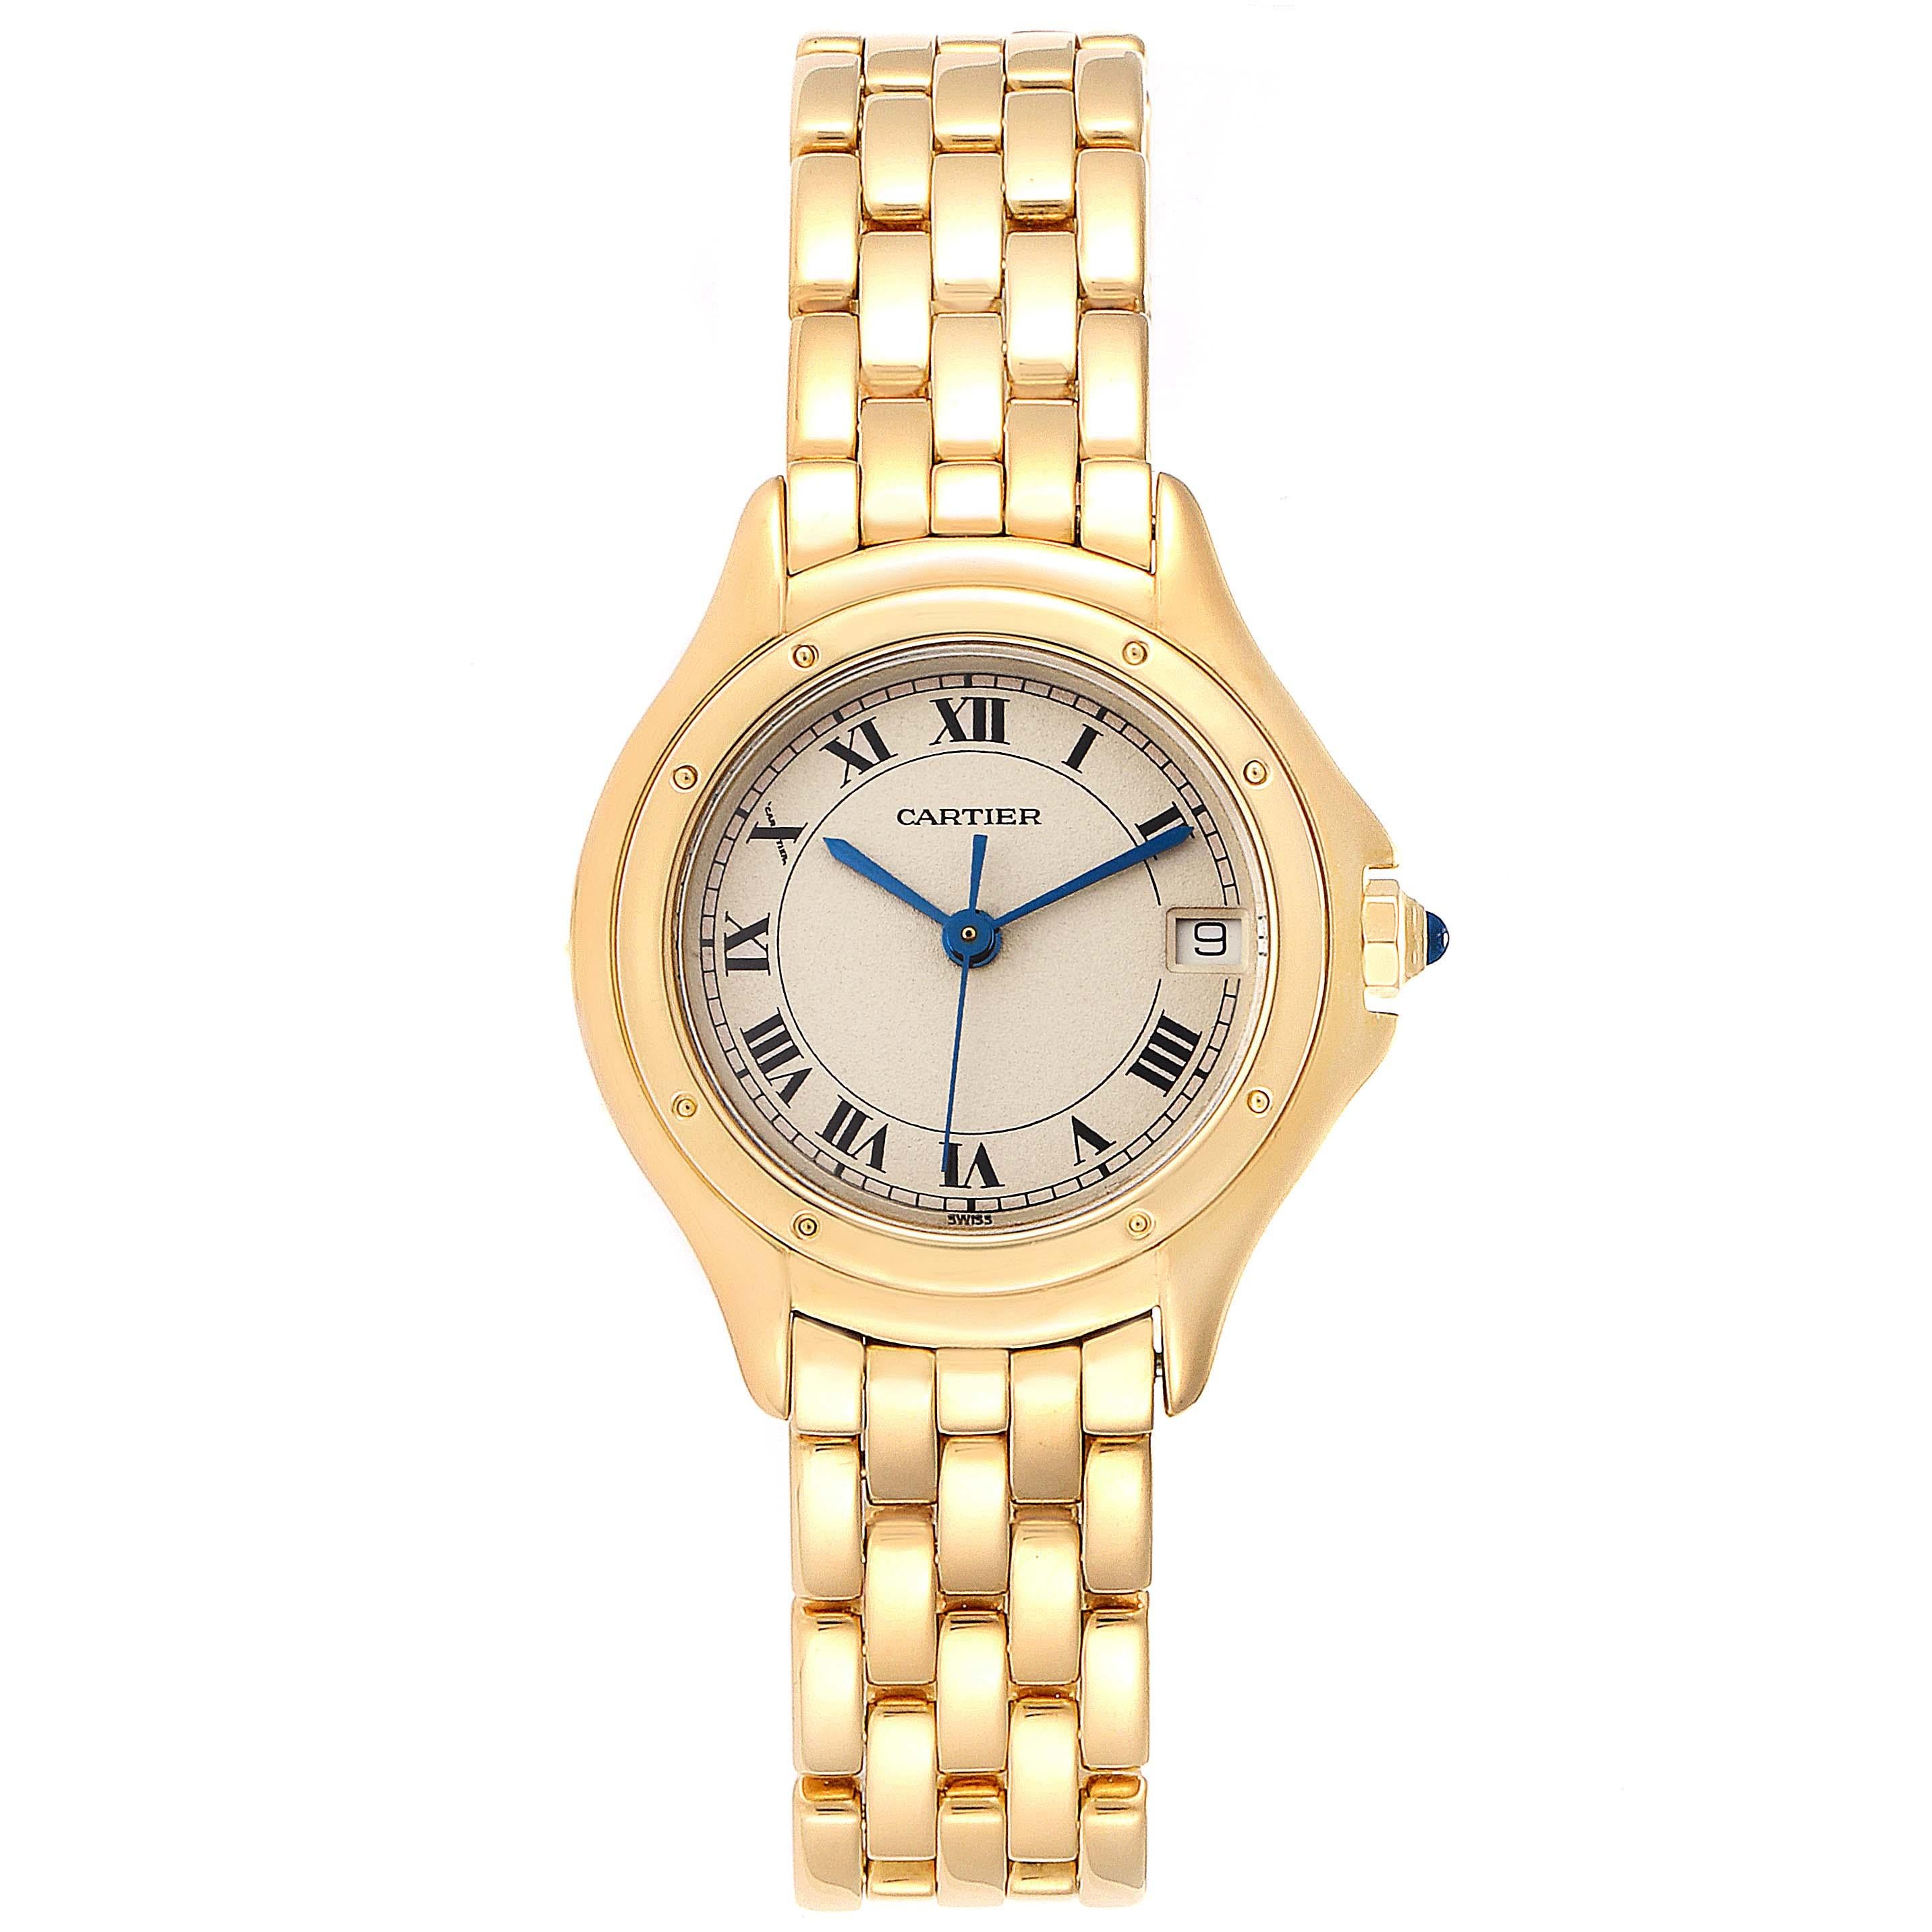 Cartier Panthere Cougar 18K Yellow Gold Ladies Watch 887906. Quartz movement. 18k yellow gold round case 26.0 mm in diameter Octagonal crown set with the diamond. 18k yellow gold bezel. Scratch resistant sapphire crystal. Silver dial with roman